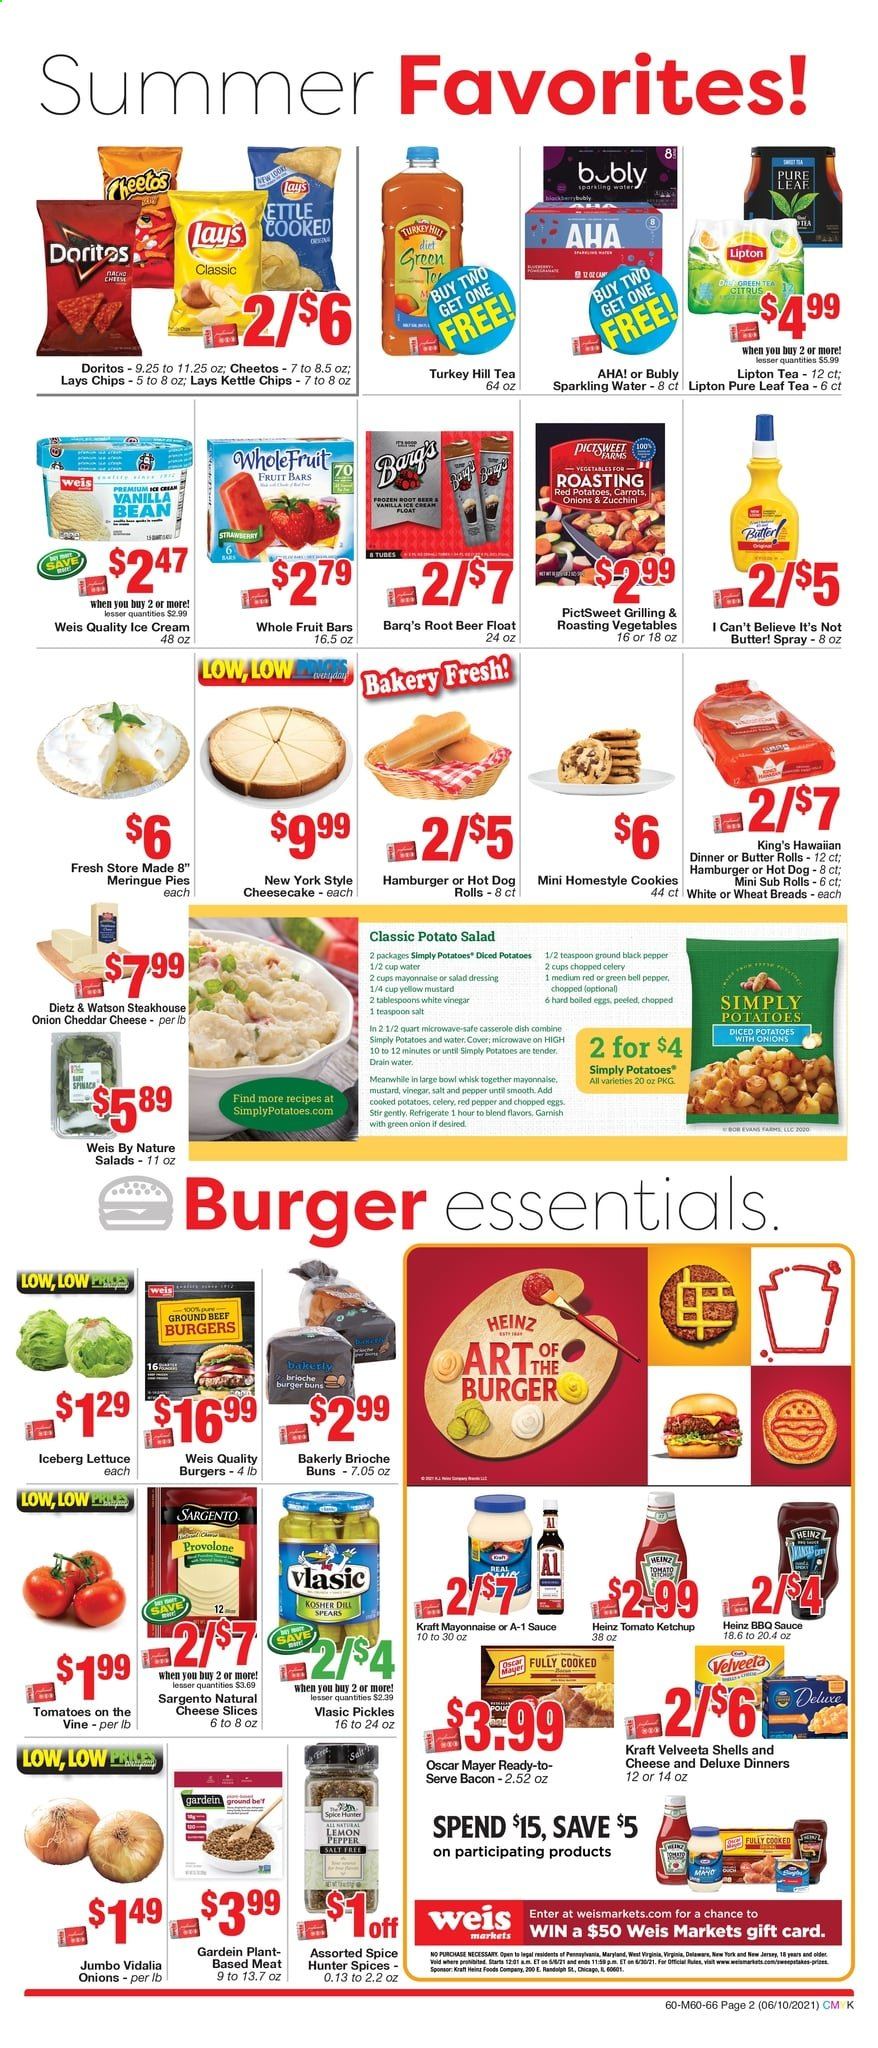 thumbnail - Weis Flyer - 06/10/2021 - 07/15/2021 - Sales products - hot dog rolls, buns, brioche, bell peppers, tomatoes, onion, lettuce, red potatoes, beef meat, ground beef, hamburger, diced potatoes, sauce, beef burger, Kraft®, bacon, Oscar Mayer, Dietz & Watson, potato salad, sliced cheese, Provolone, Sargento, eggs, butter, I Can't Believe It's Not Butter, mayonnaise, ice cream, cookies, Doritos, Cheetos, chips, Lay’s, Heinz, pickles, dill, spice, BBQ sauce, mustard, salad dressing, ketchup, dressing, Lipton, sparkling water, tea, Pure Leaf, beer, casserole, teaspoon. Page 2.